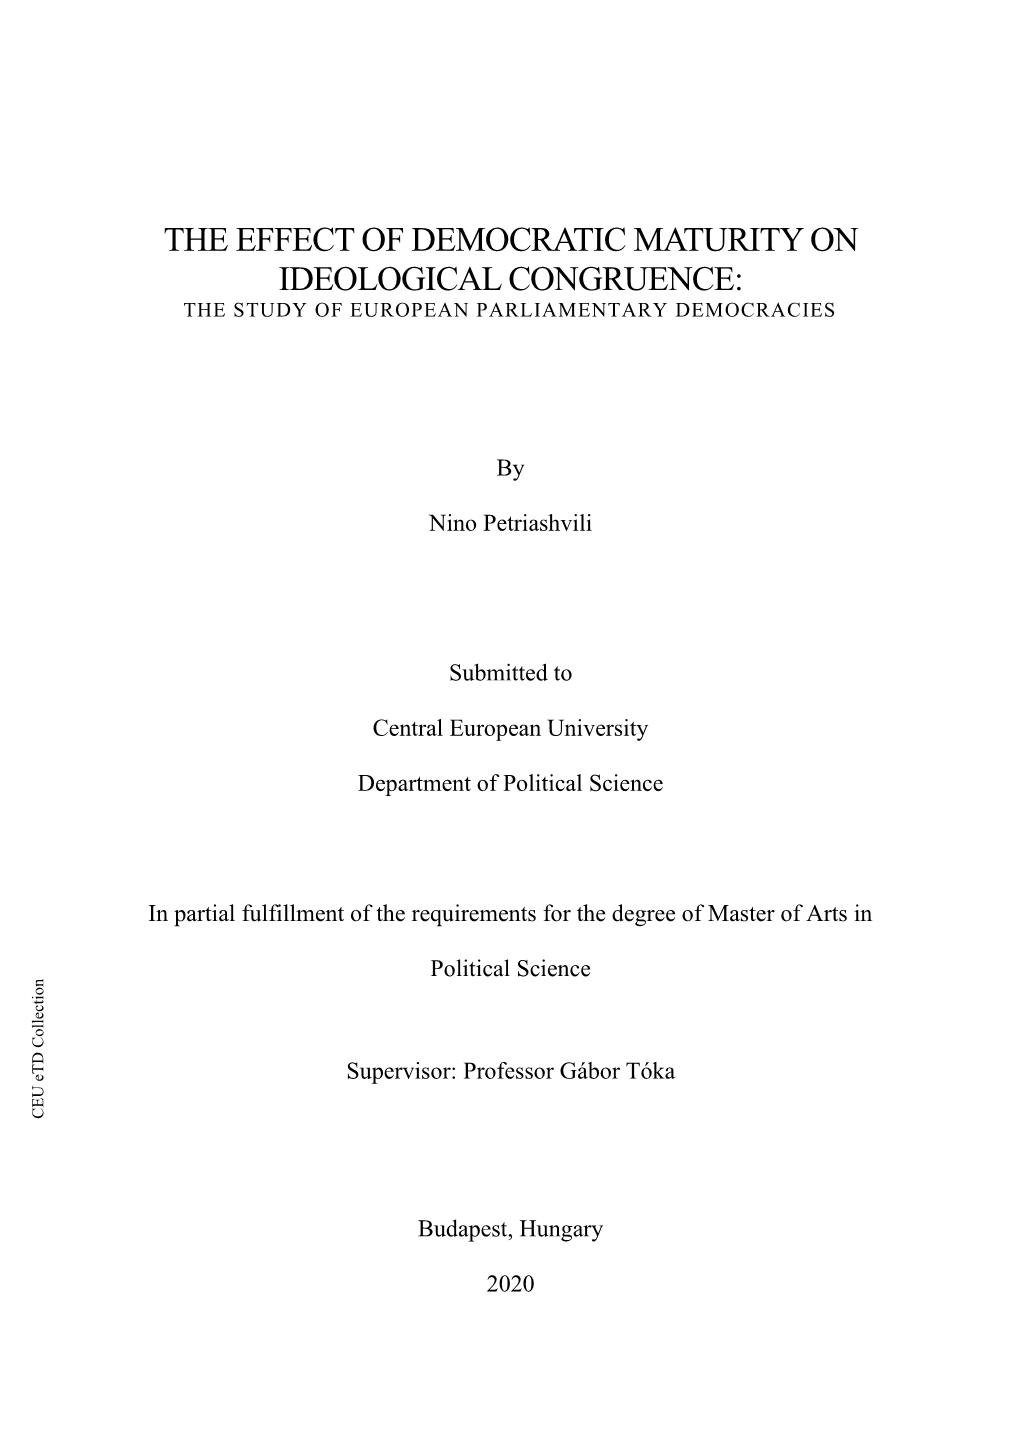 The Effect of Democratic Maturity on Ideological Congruence: the Study of European Parliamentary Democracies